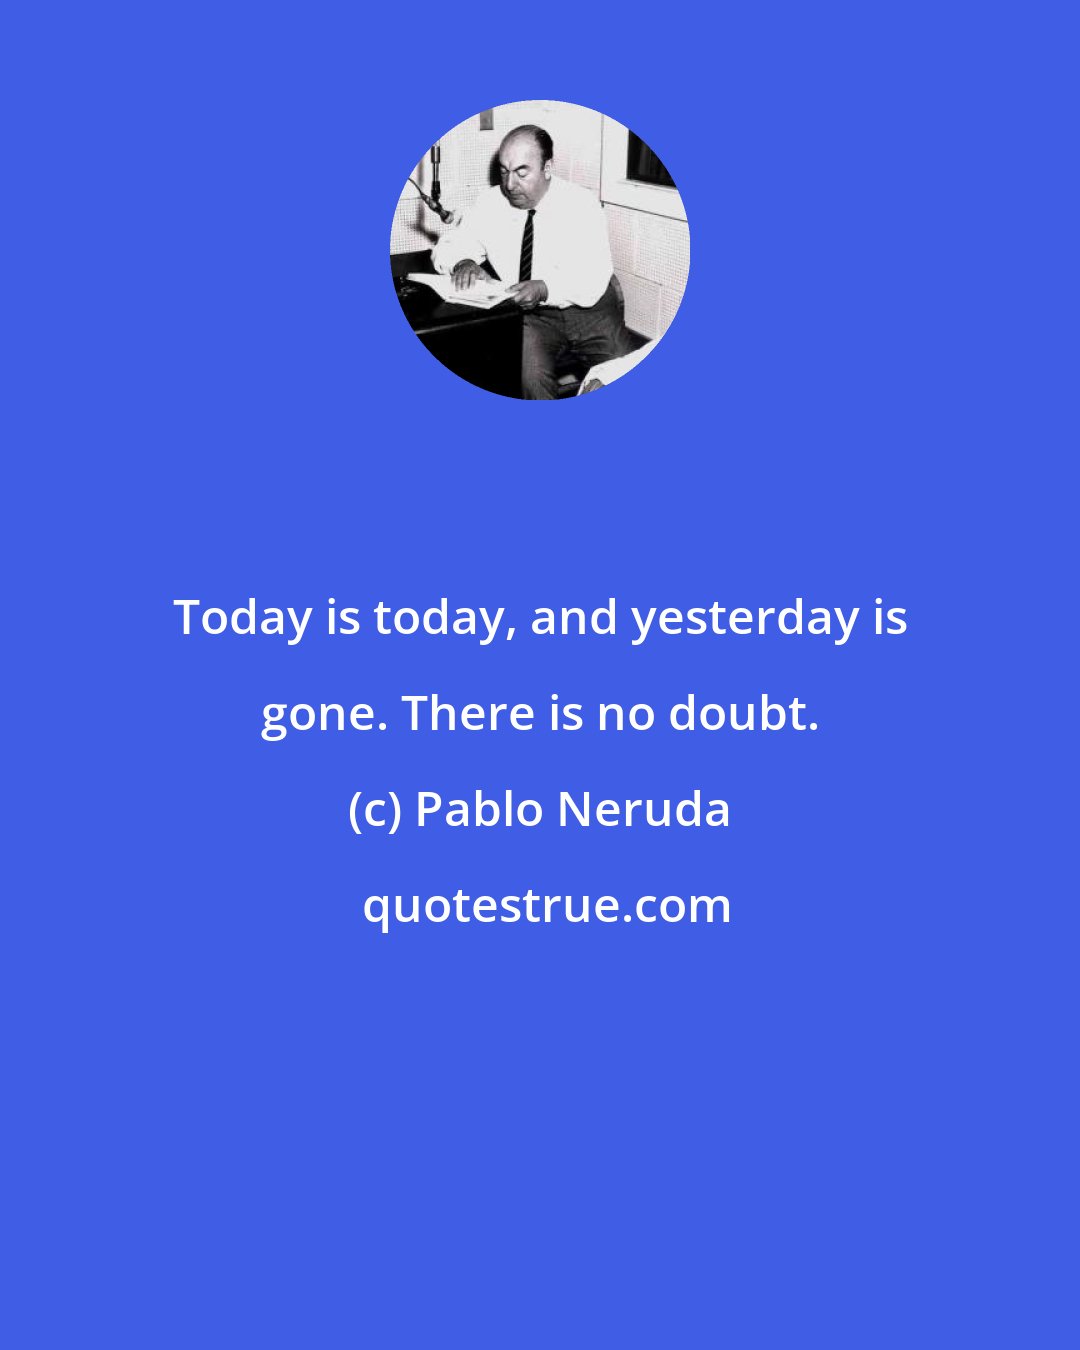 Pablo Neruda: Today is today, and yesterday is gone. There is no doubt.